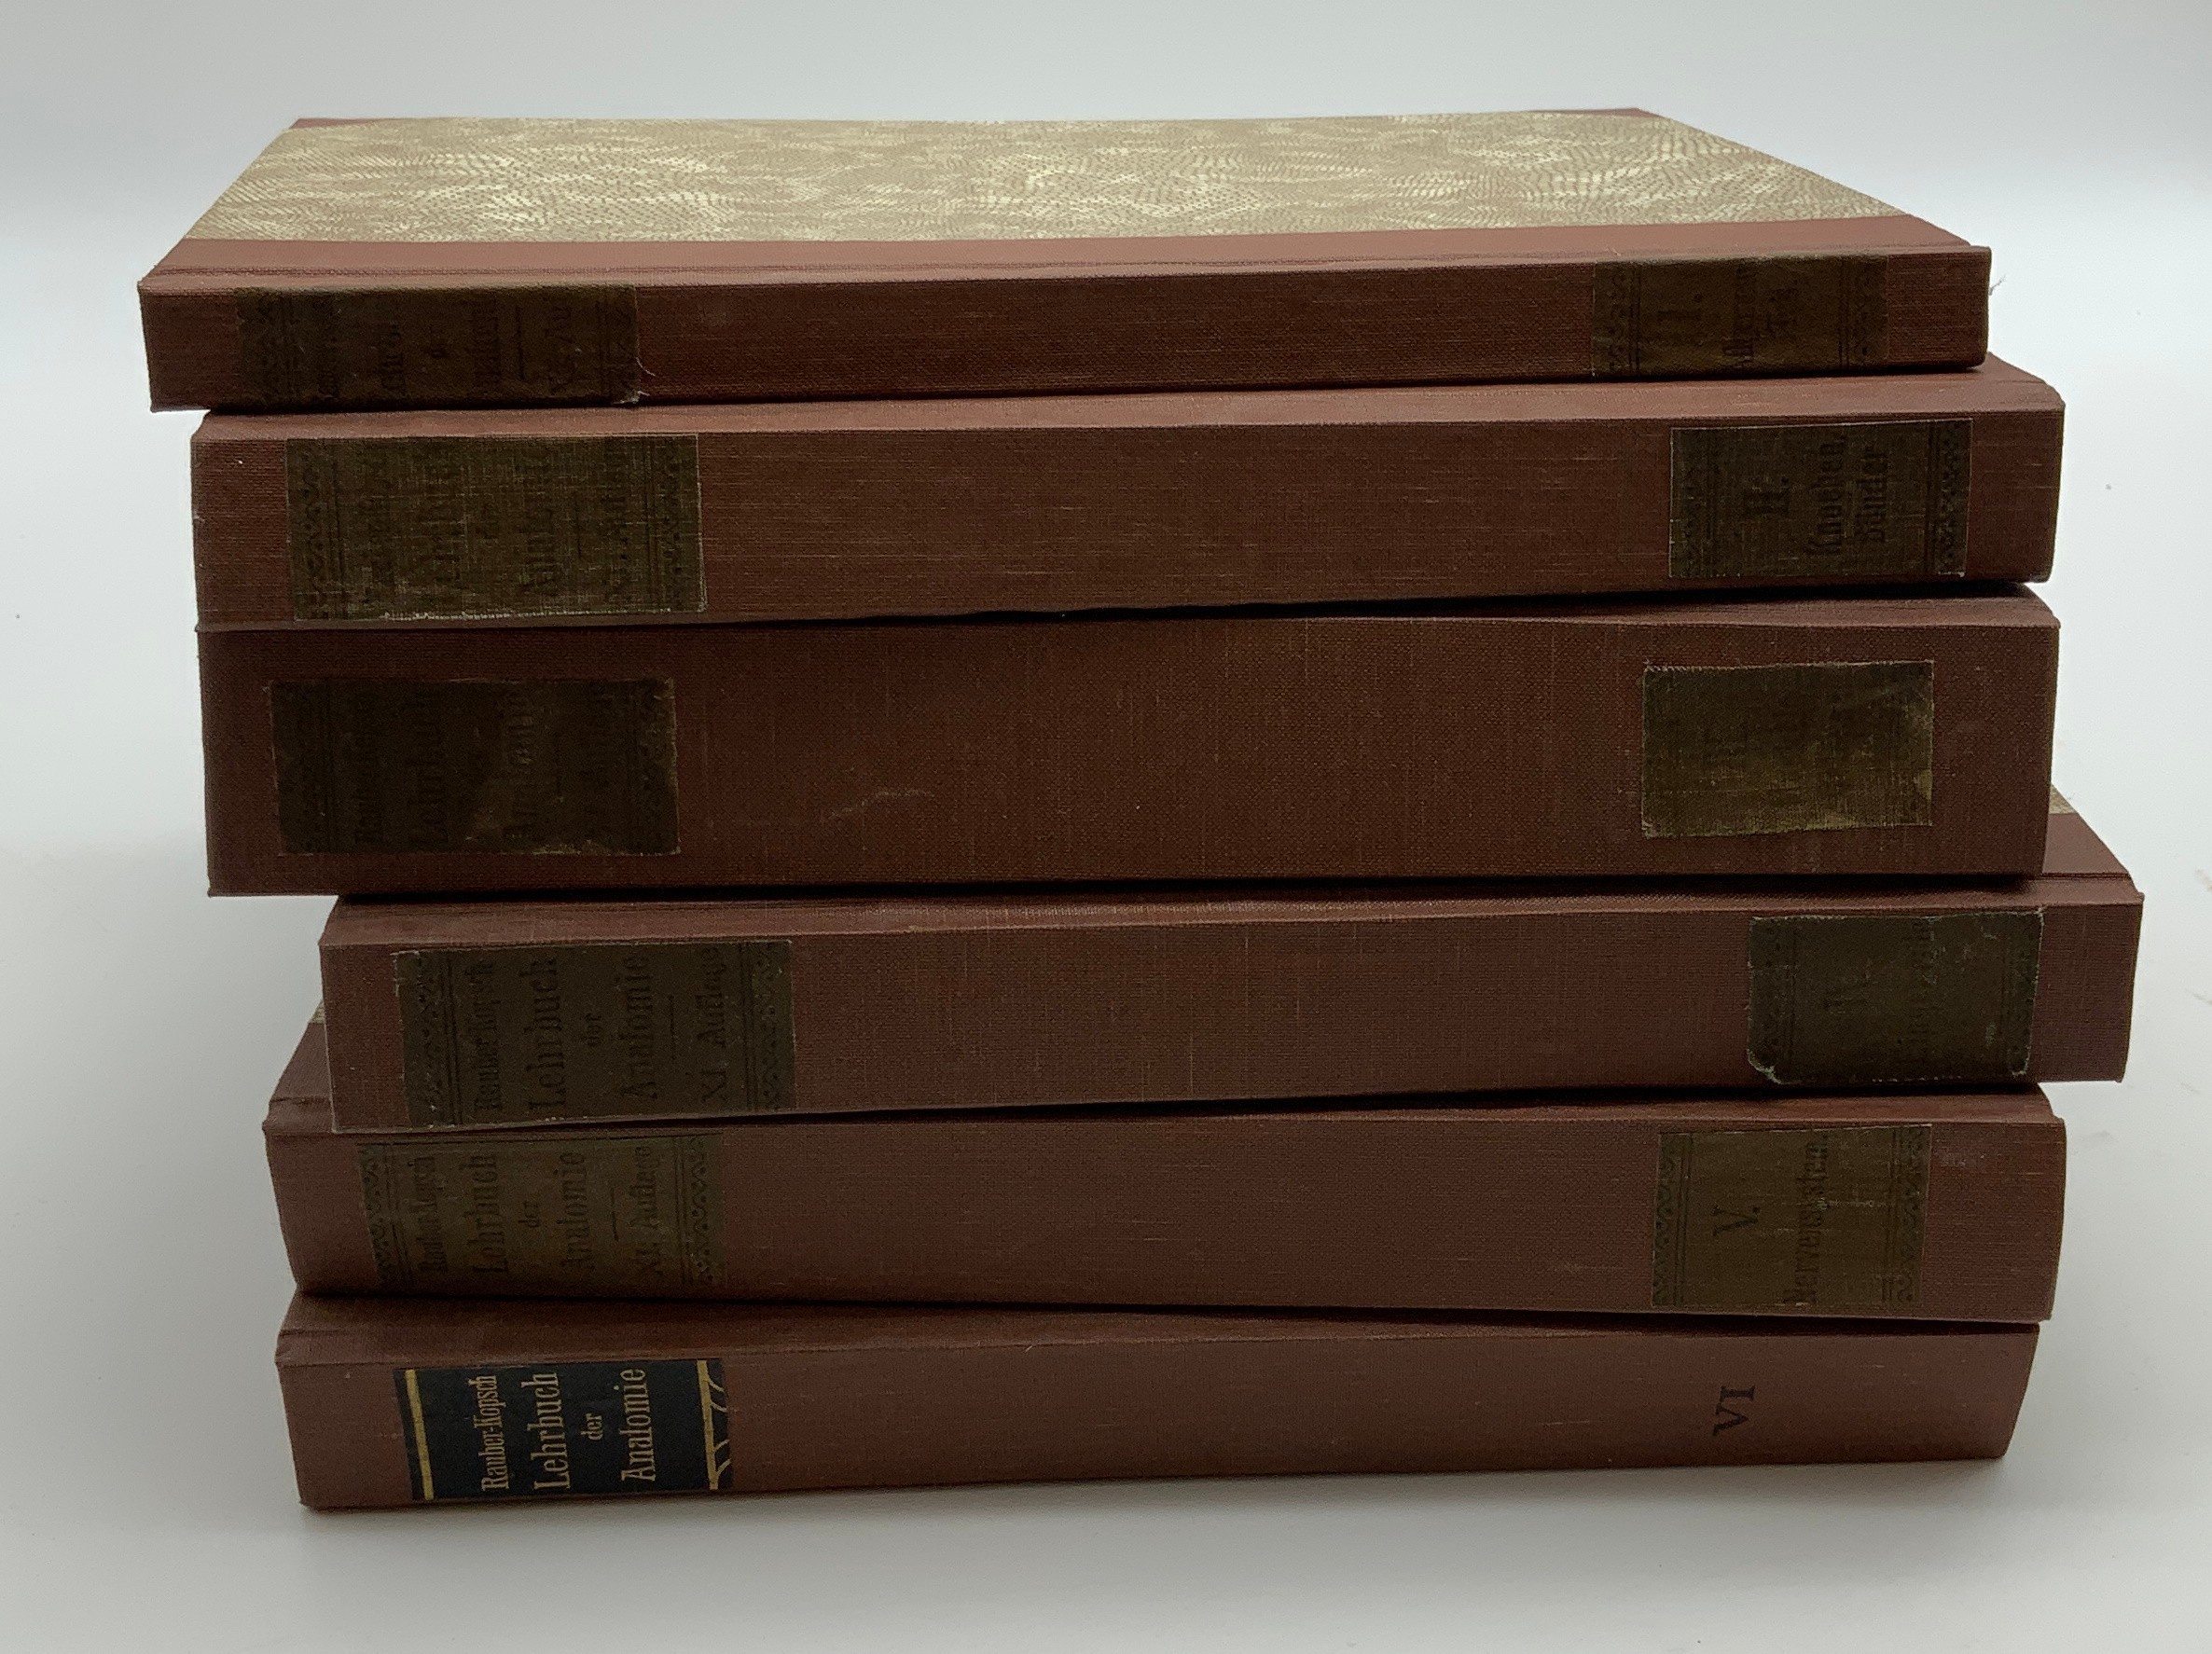 SET OF MEDICAL ANATOMY BOOKS (GERMAN) FROM the 1920s